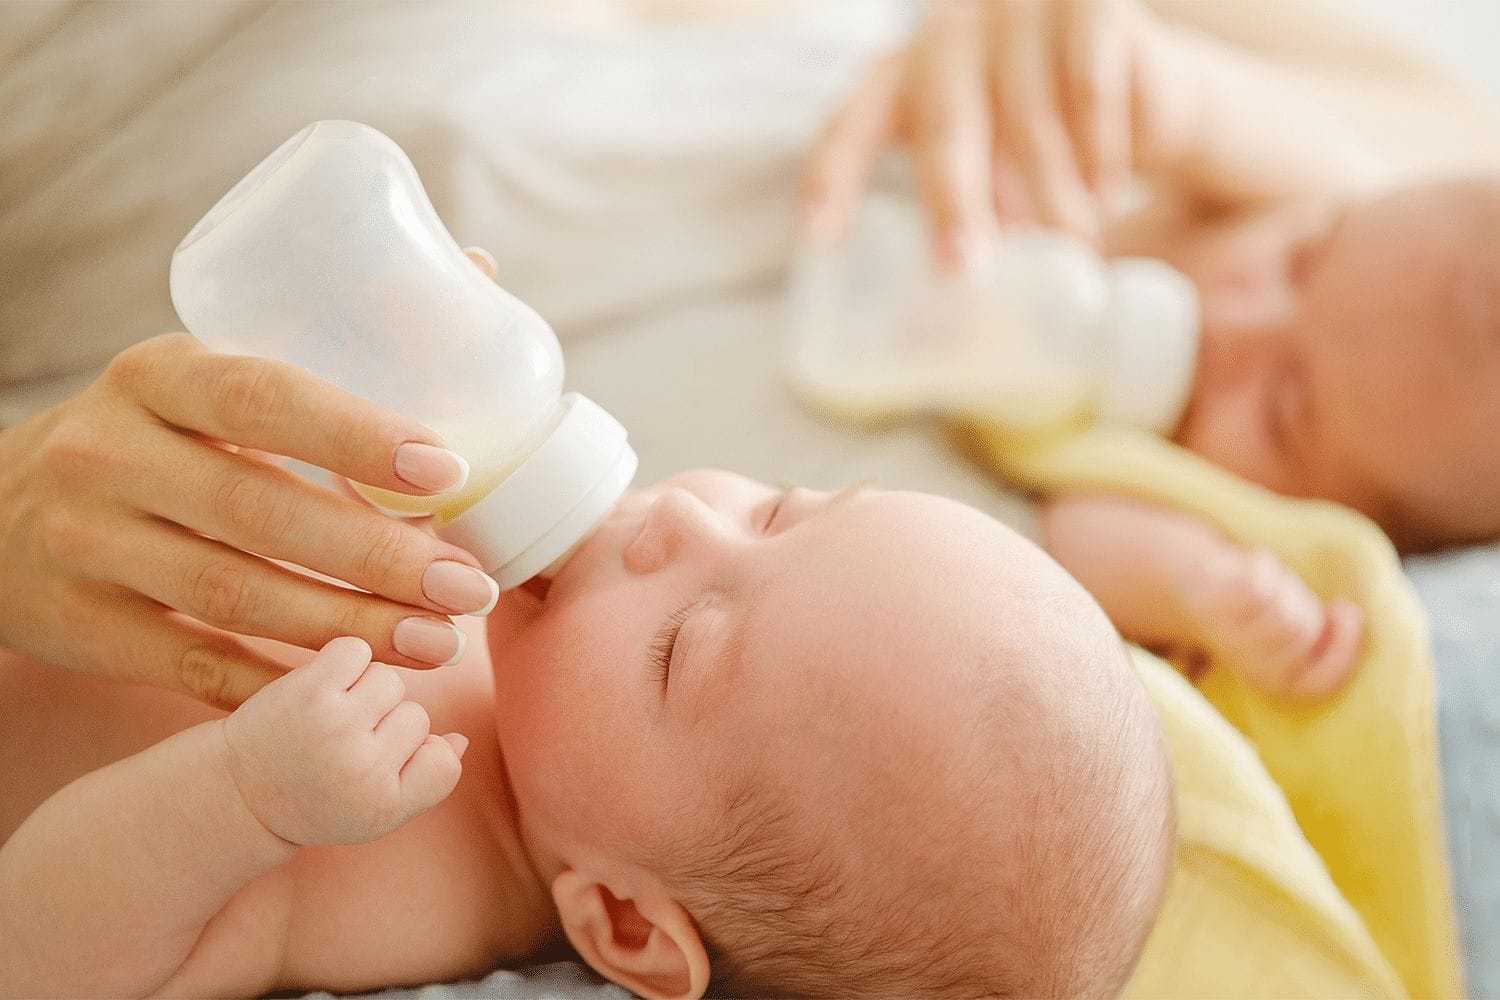 What Happens When Toddler Drinks Too Much Milk: Key Insights